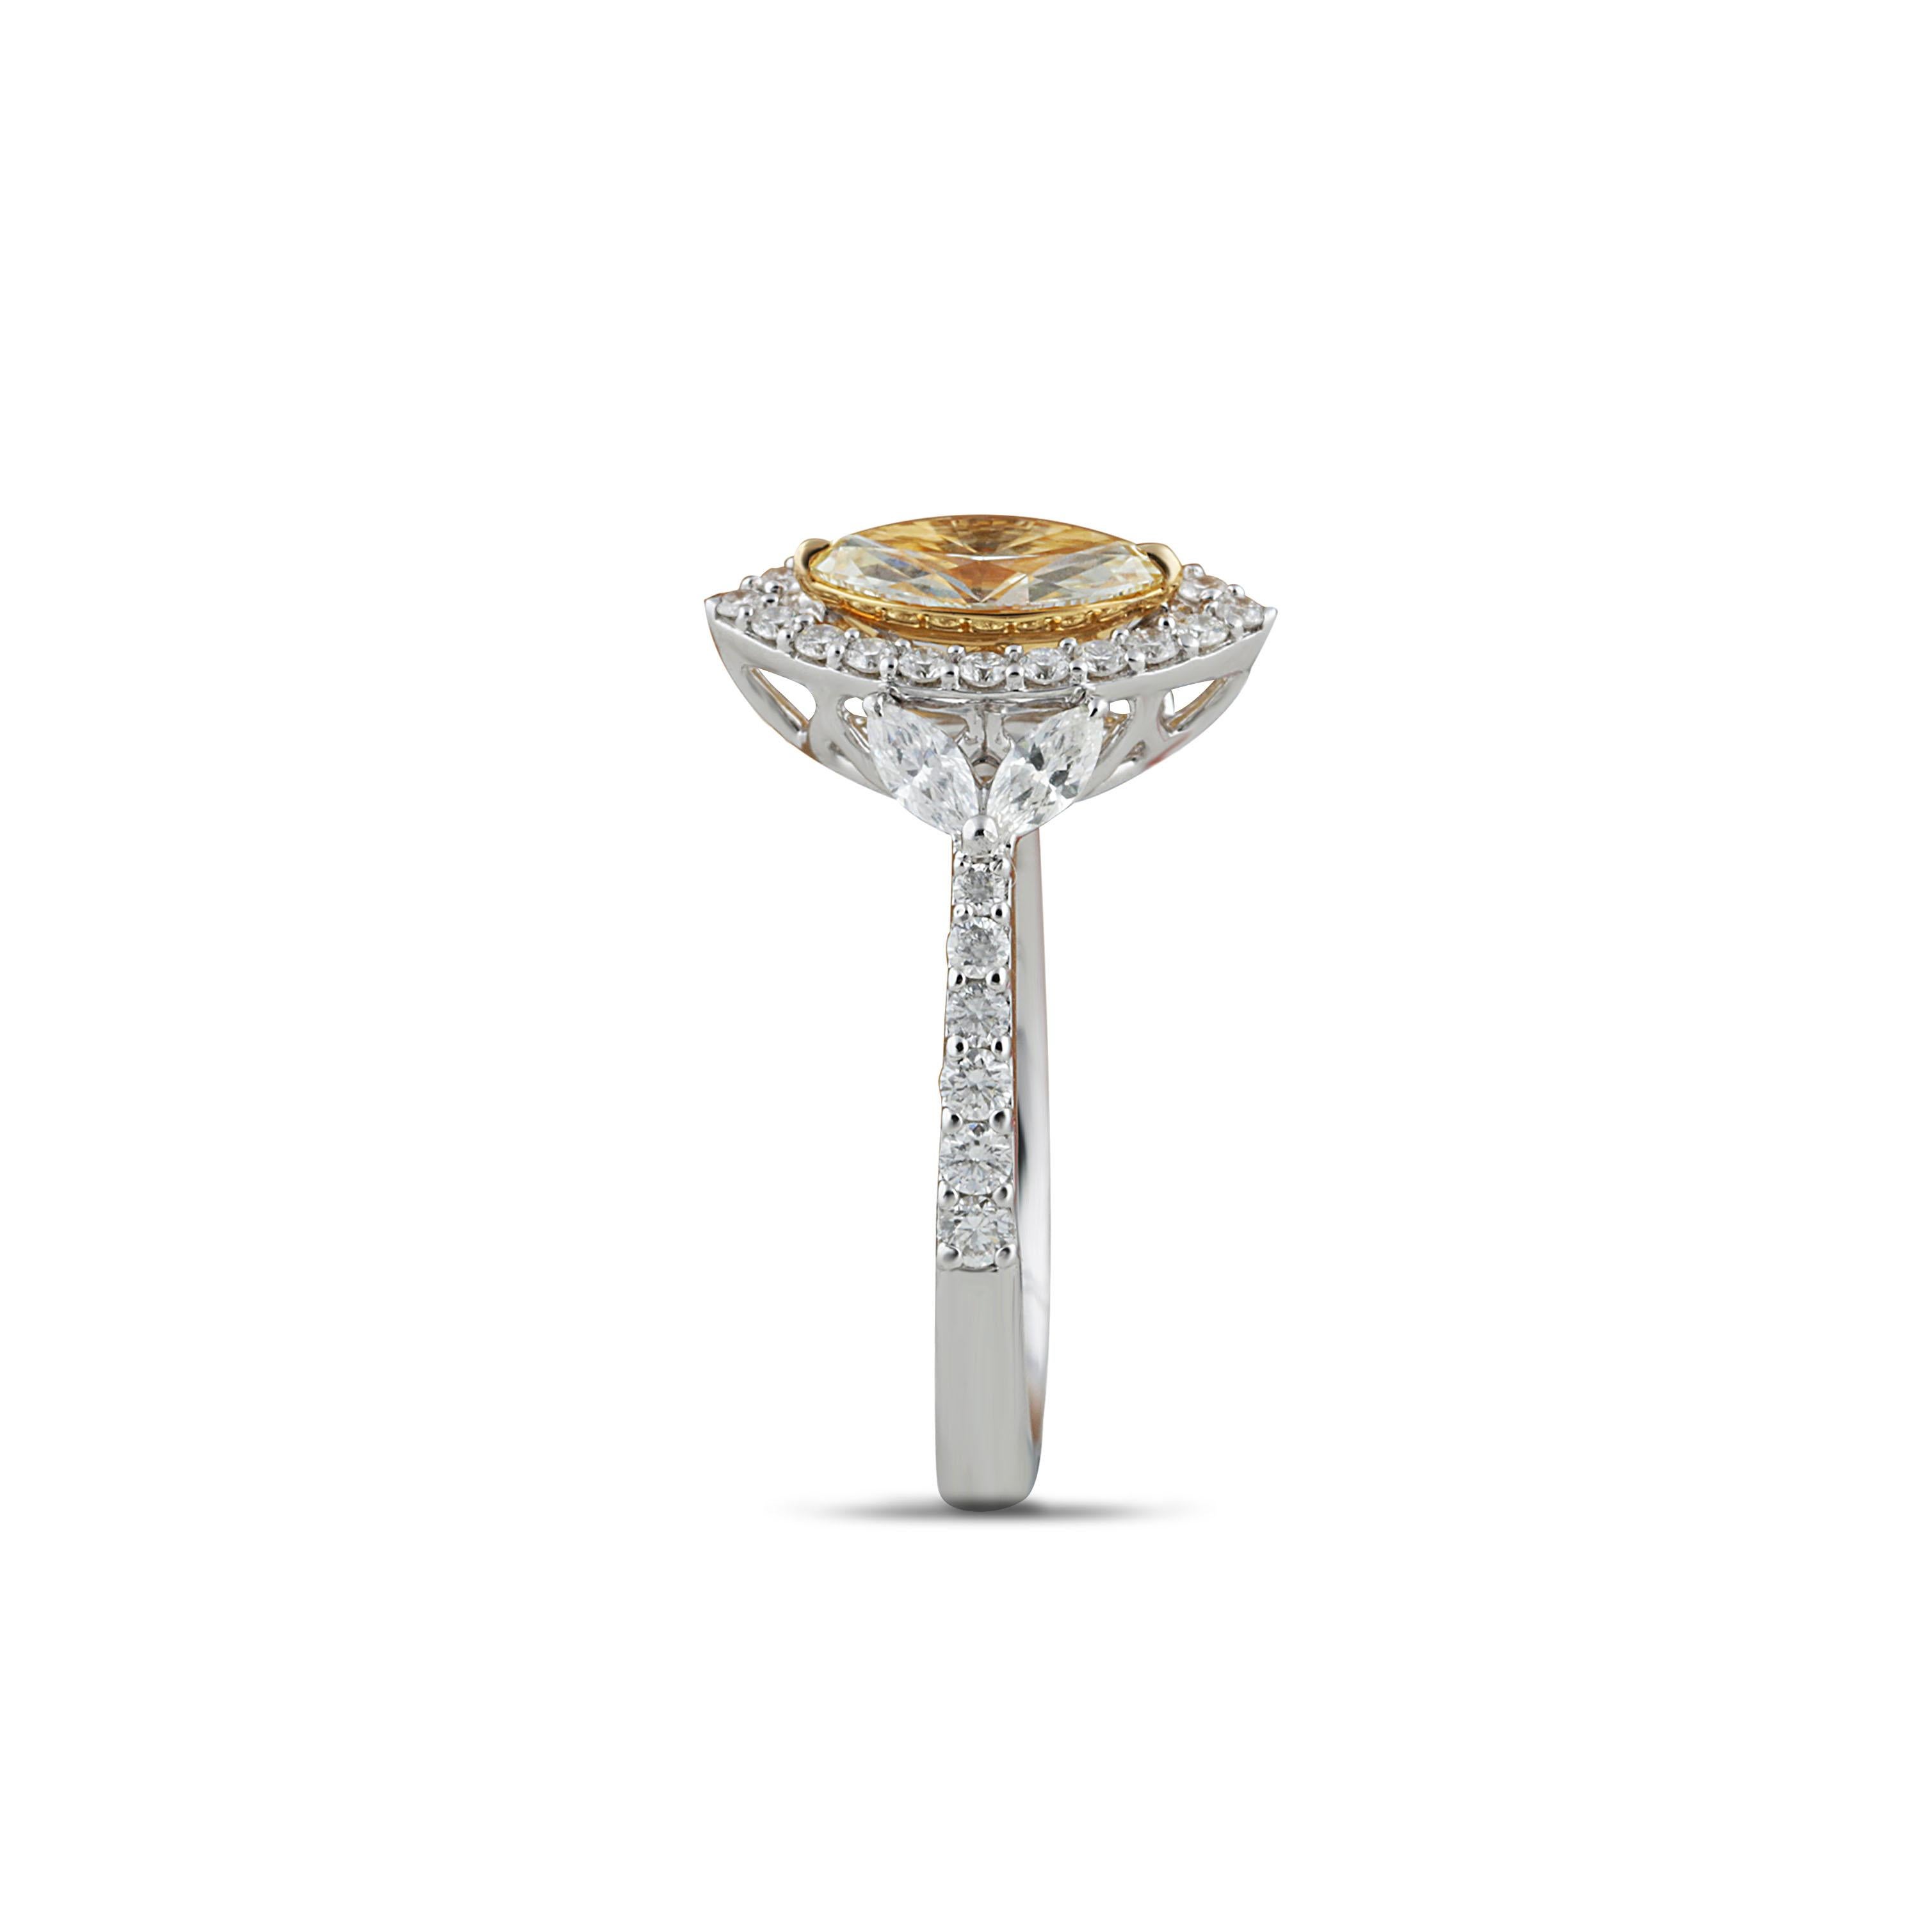 Yellow and white diamond ring

A marquise-shaped yellow diamond is closely encased by round brilliant white diamonds in a prong setting on an 18K white and yellow gold base, with white marquises on shoulders, giving it a classic look. Adorned with